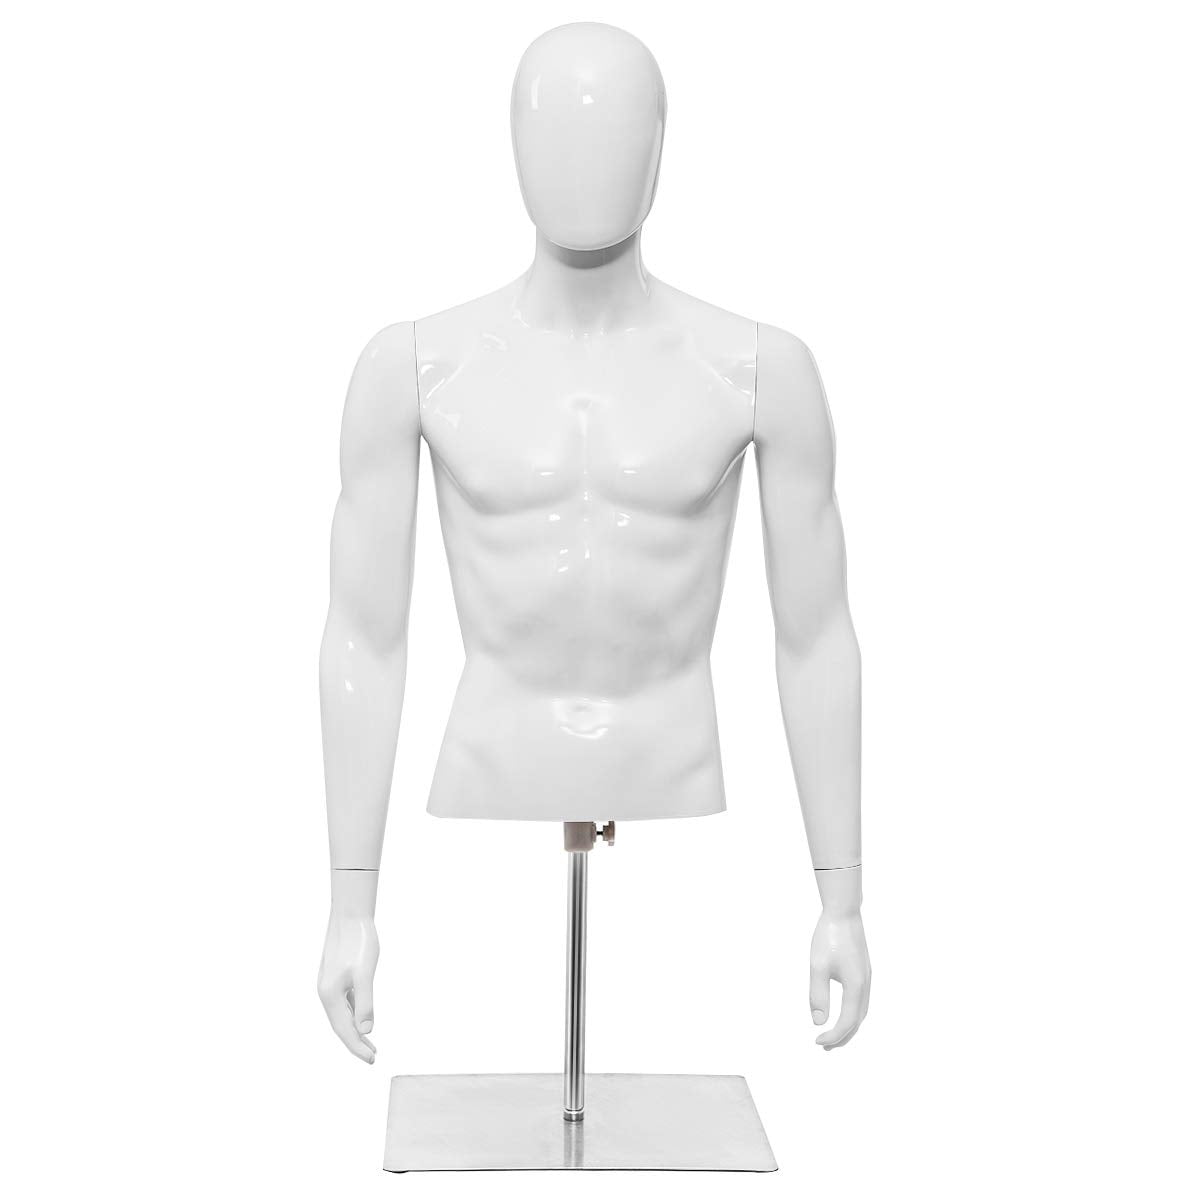 1 STAND 2 REMOVAL HANGERS 2 FREE-STANDING MANNEQUIN MALE & FEMALE TORSOS SET 